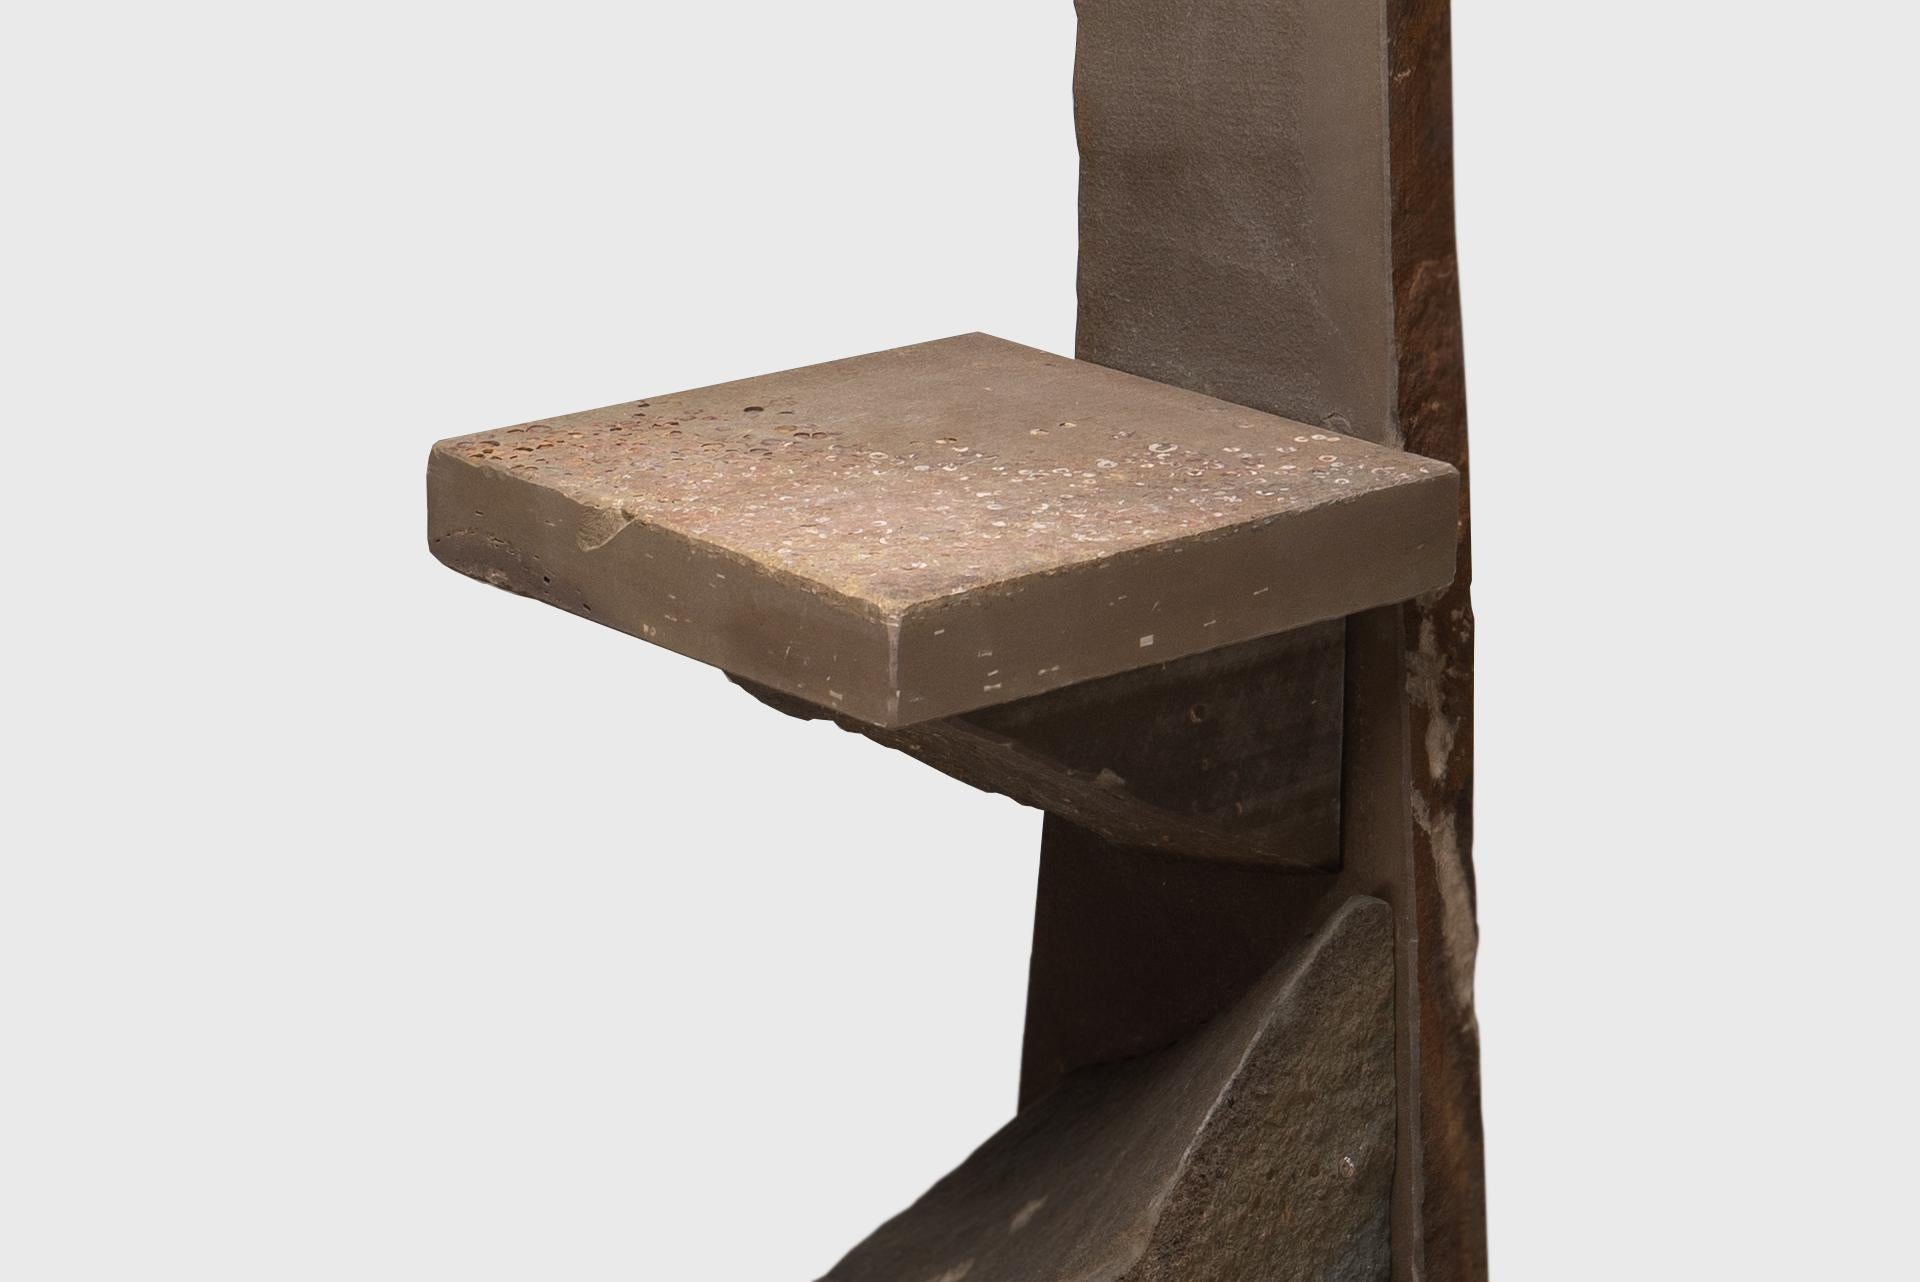 Contemporary Natural Chair 21, Graywacke Offcut Gray Stone, Carsten in Der Elst For Sale 2